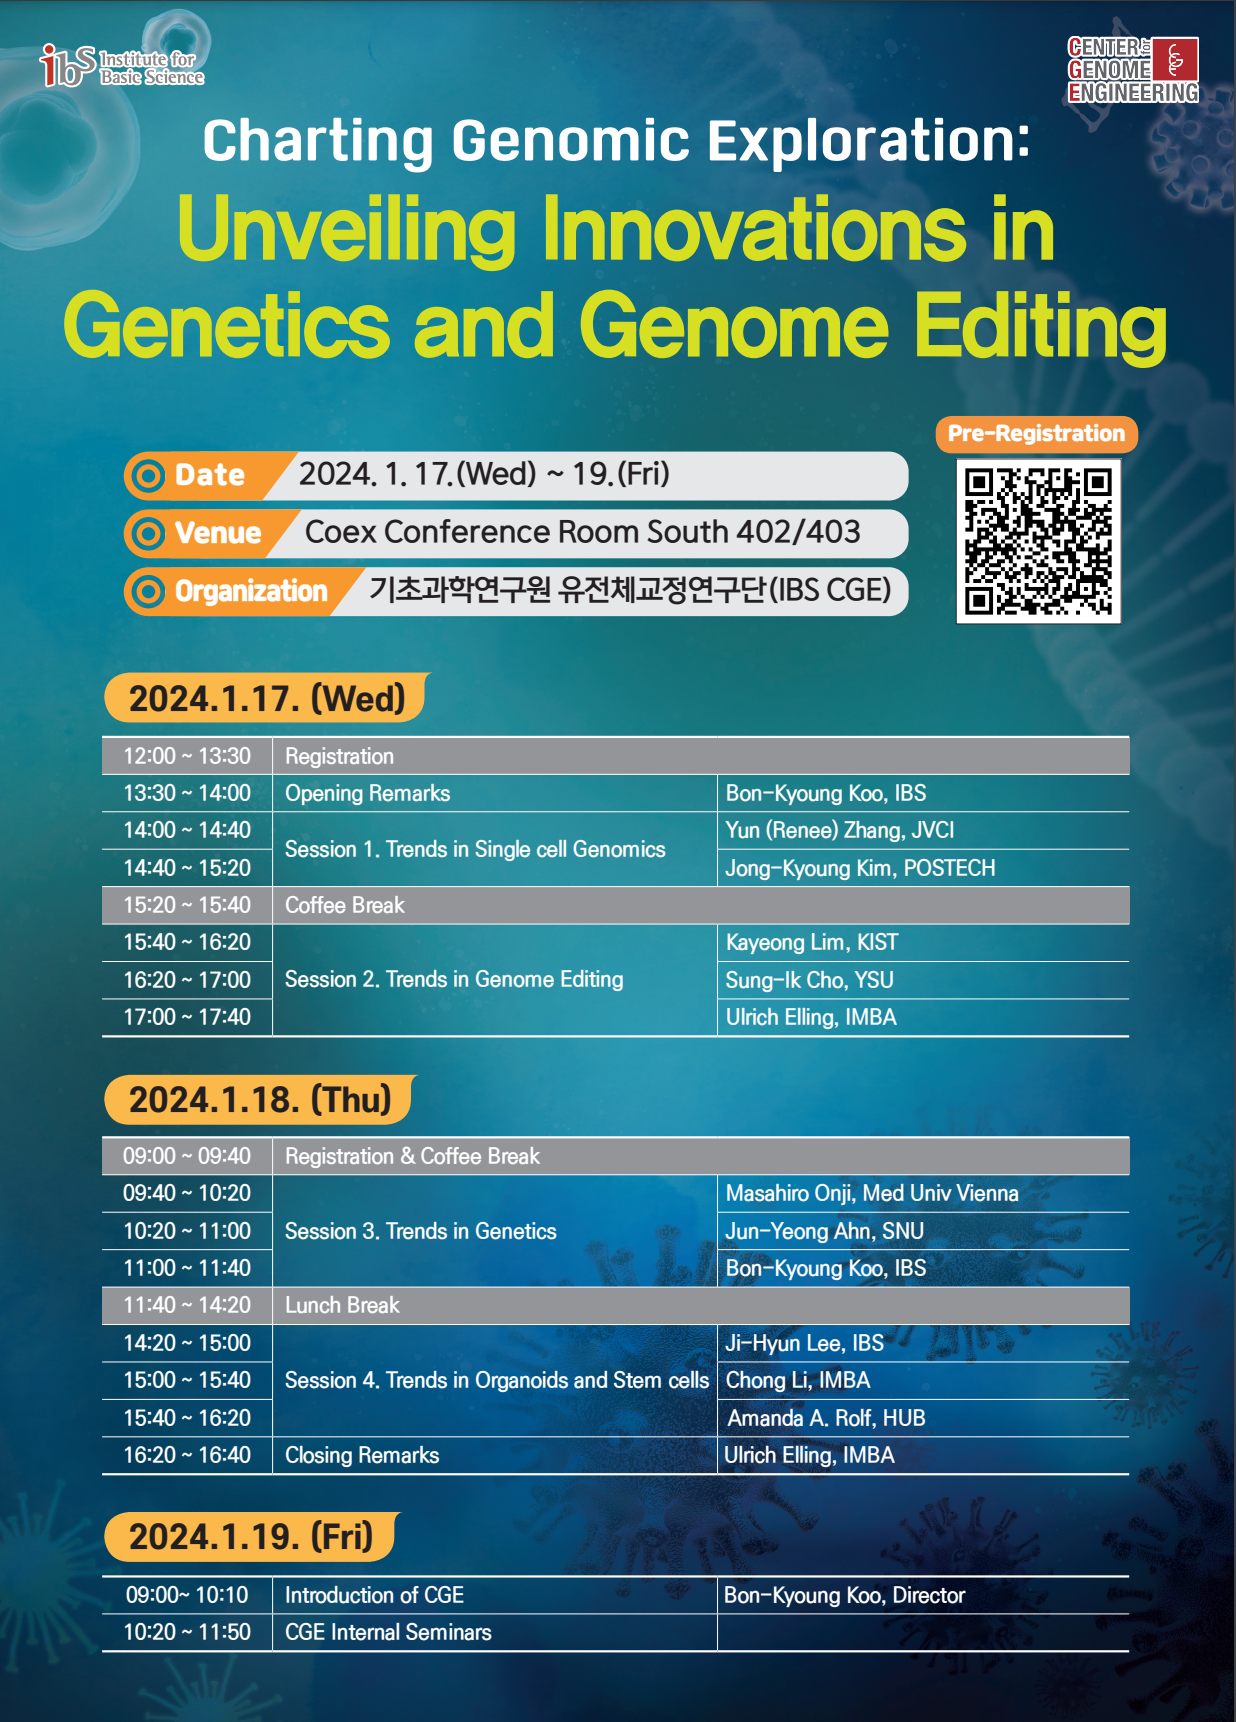 2nd Charting Genomic Exploration: Unveiling Innovations in Genetics and Genome Editing